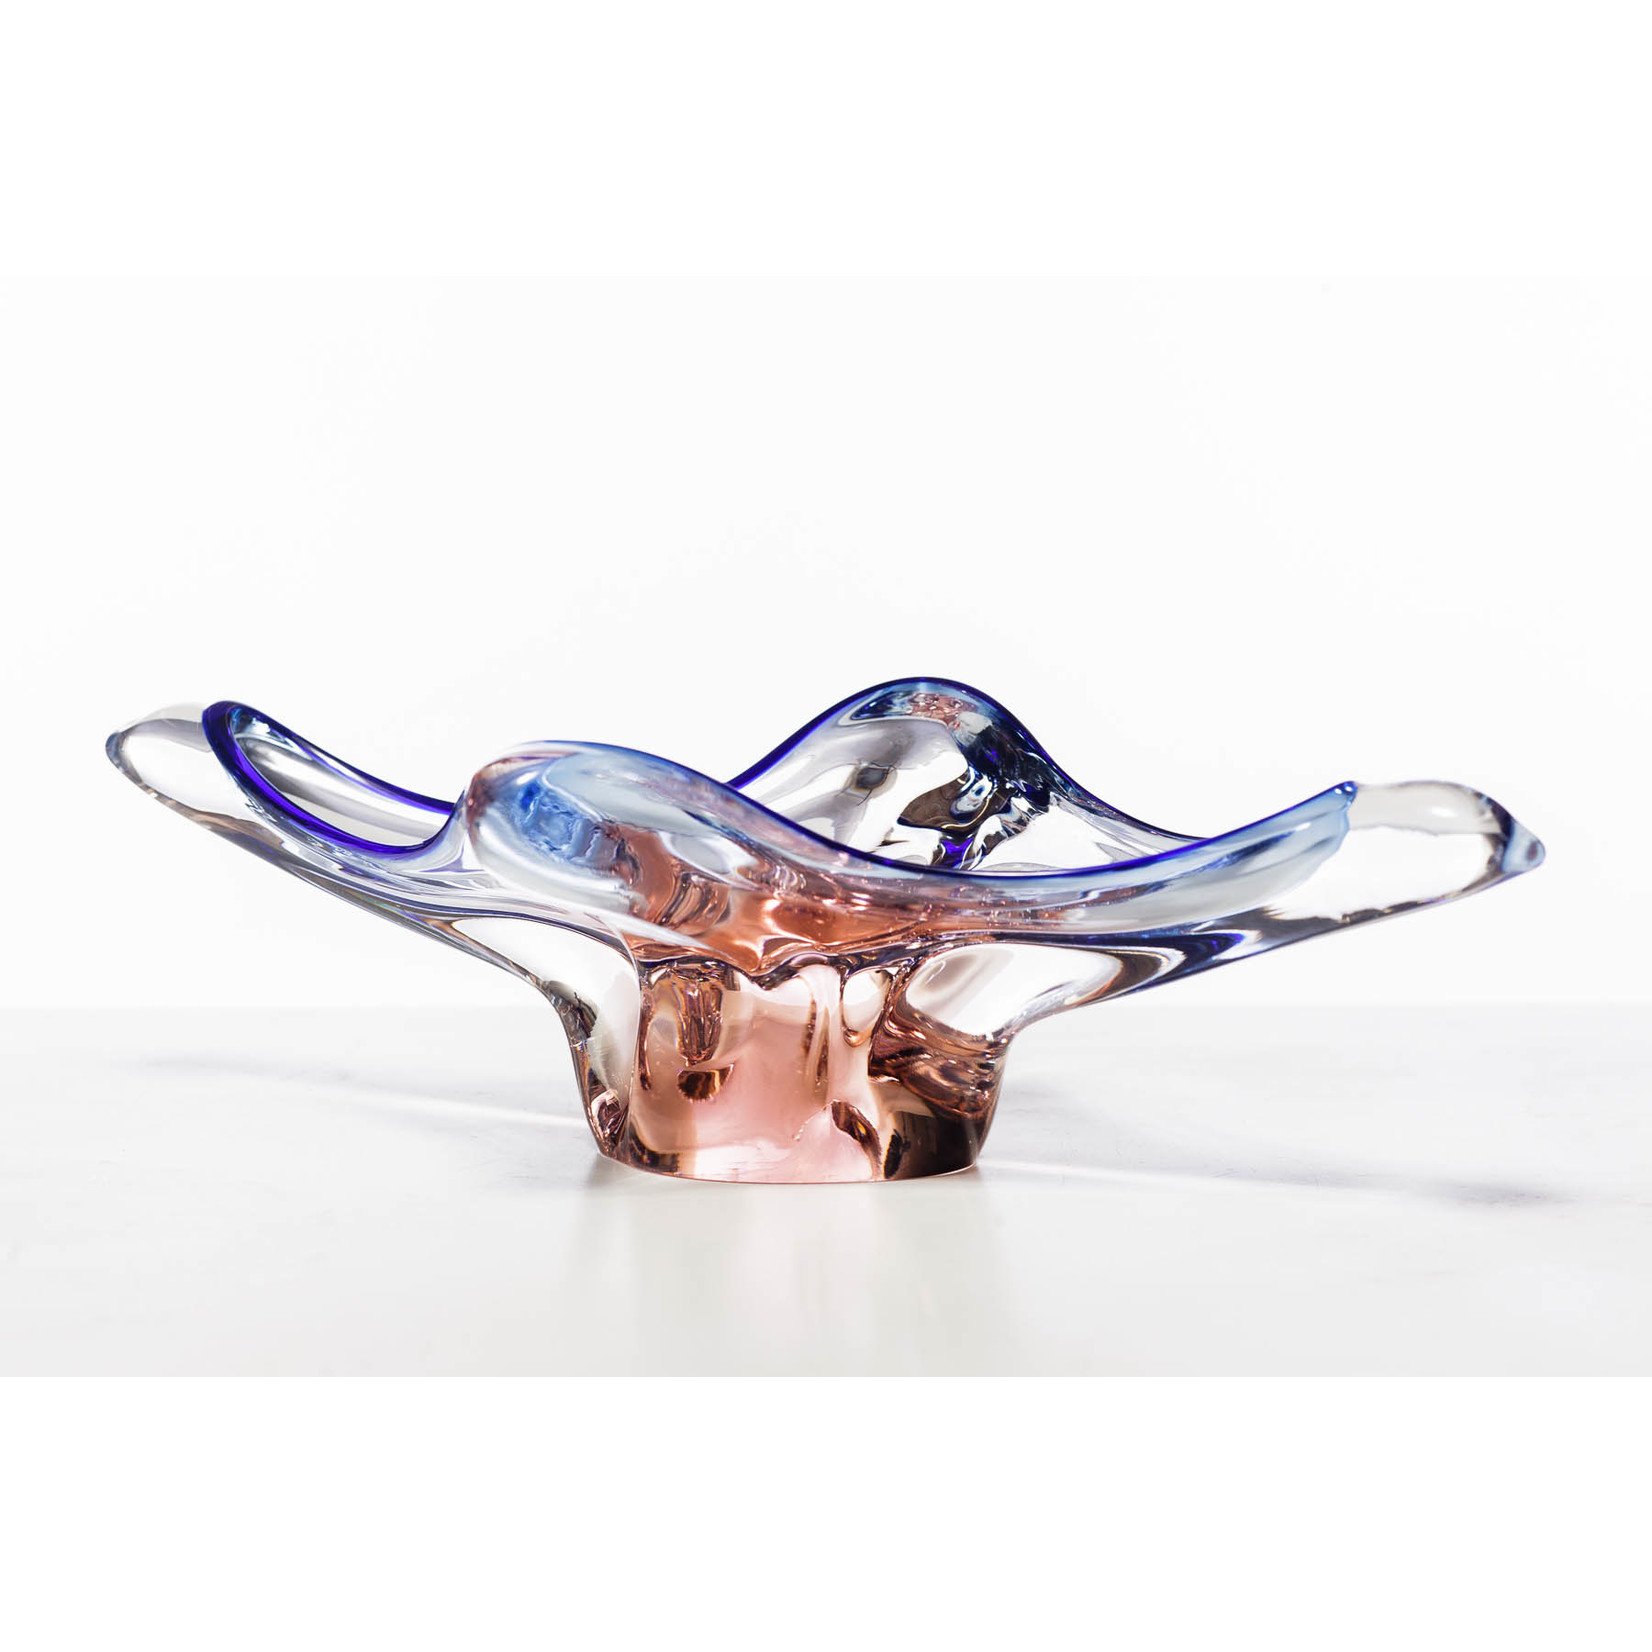 Lawrence Collection Archimede Seguso Murano Sommerso Centerpiece Bowl